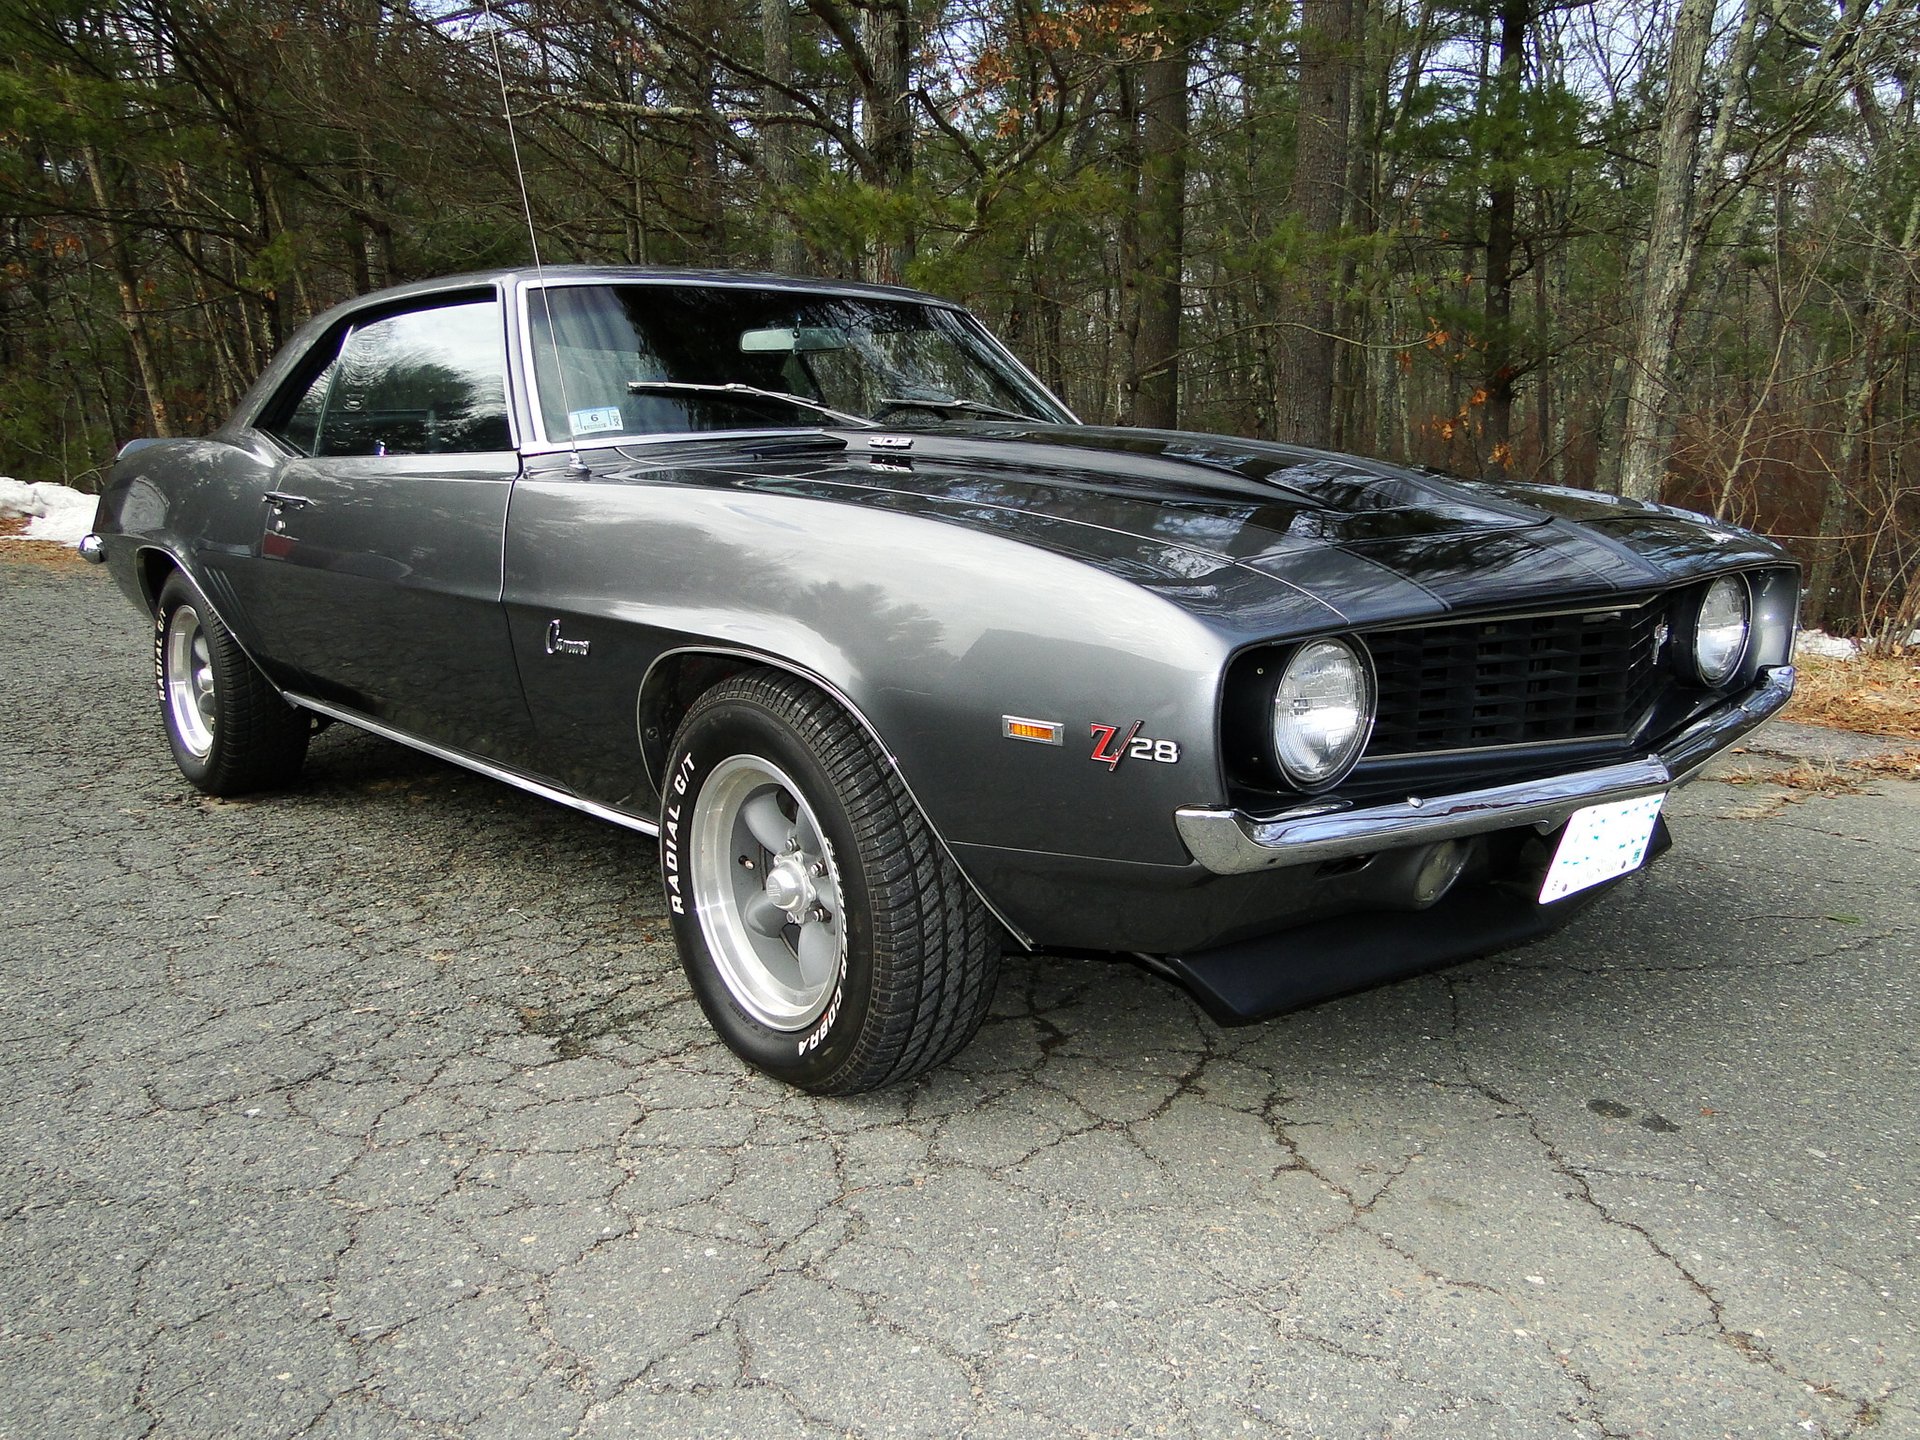 1969 Chevrolet Camaro | Legendary Motors - Classic Cars, Muscle Cars, Hot  Rods & Antique Cars - Rowley, MA